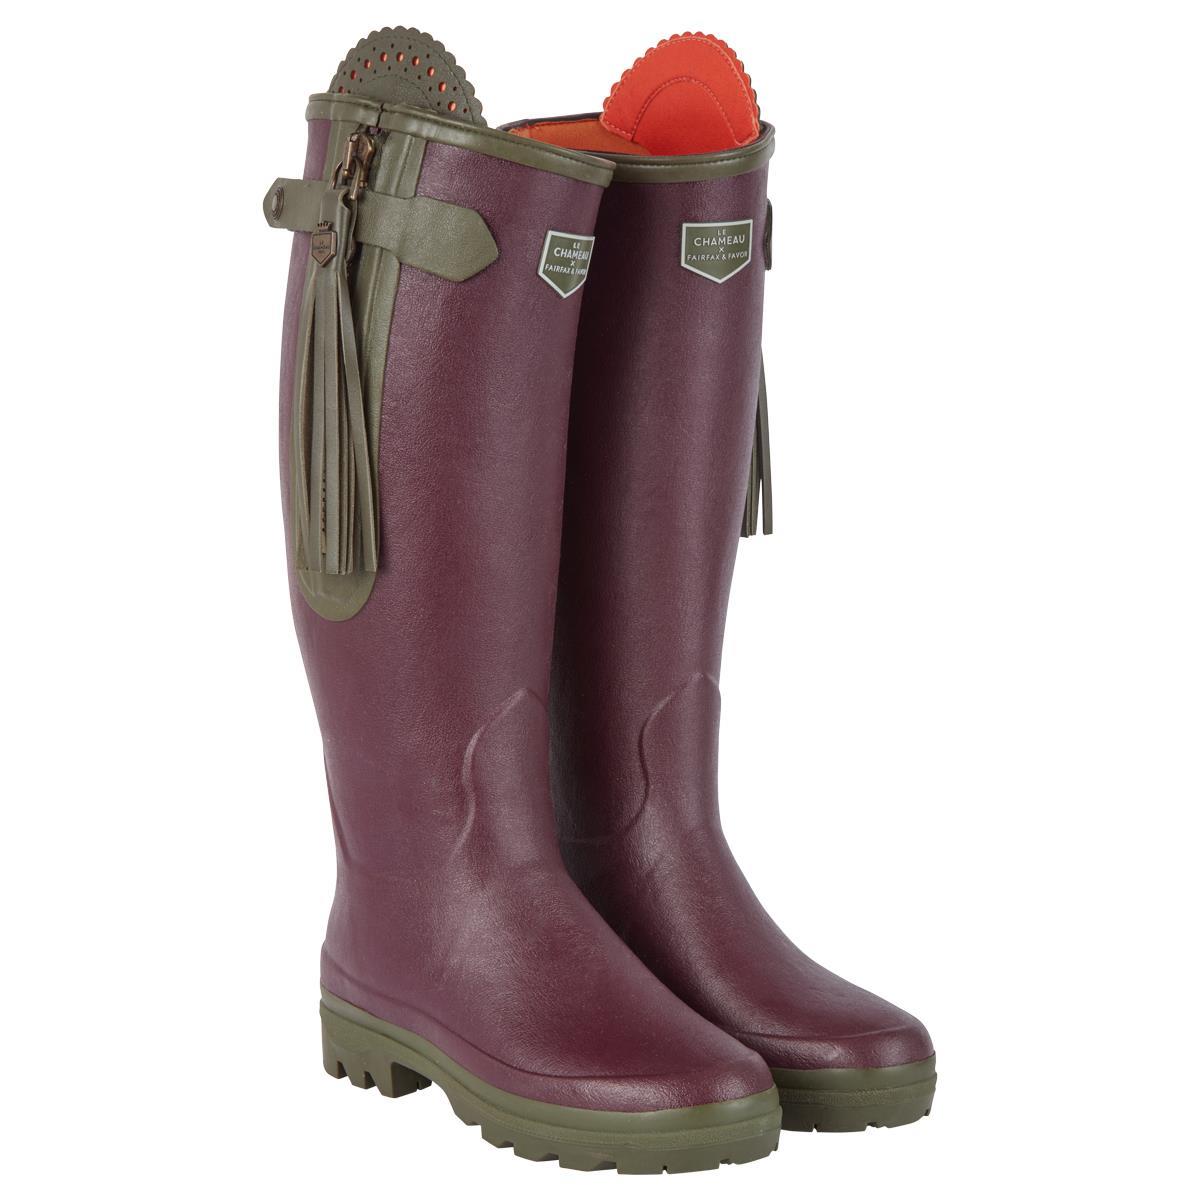 What are the features of the L'Alliance Neo Boots from Le Chameau x Fairfax & Favor fairfax and favour wellies?